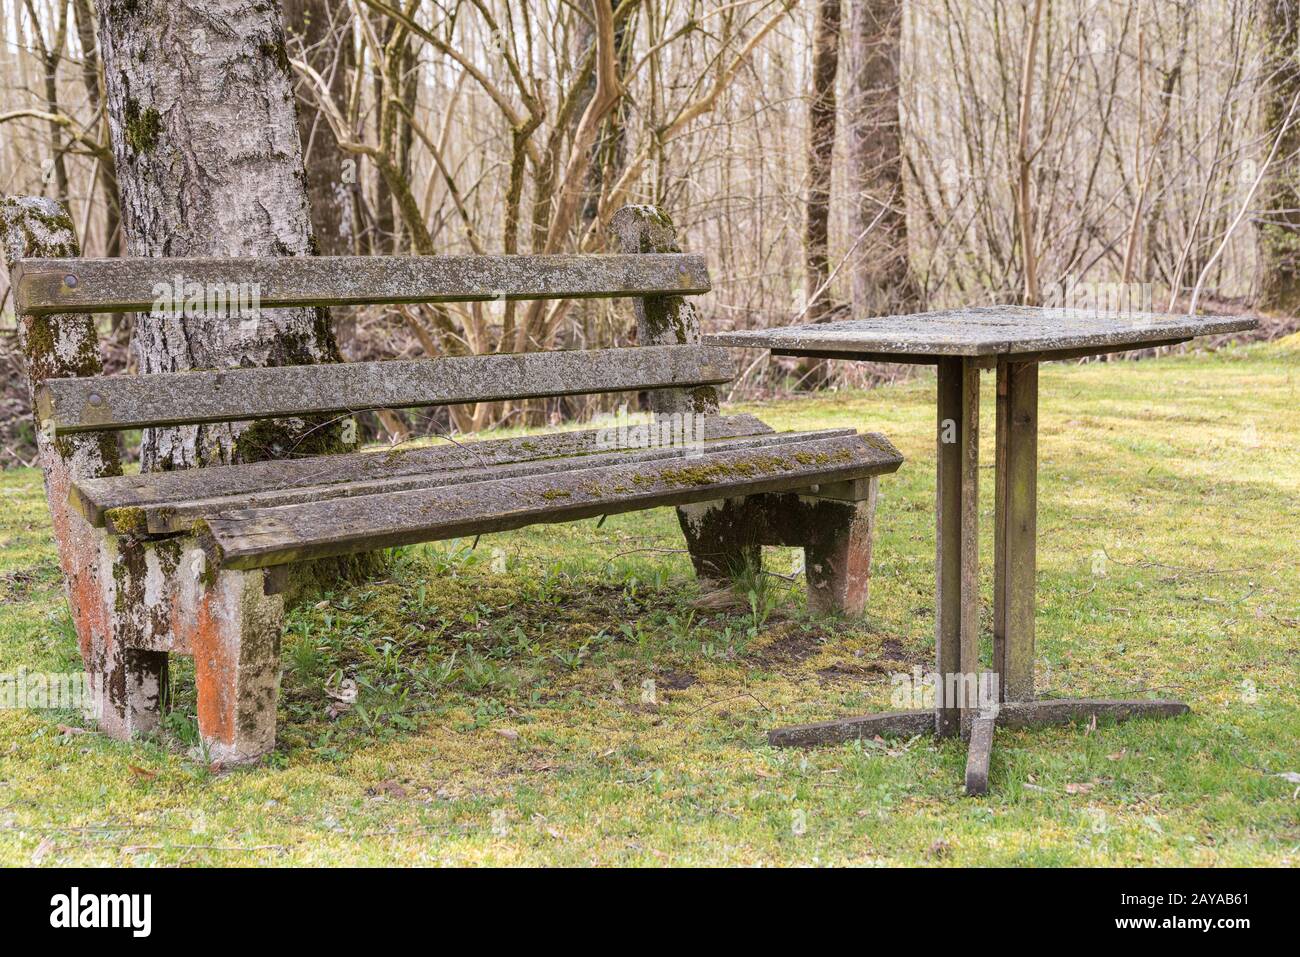 Old antique rest area with garden bench and table with stone top Stock Photo